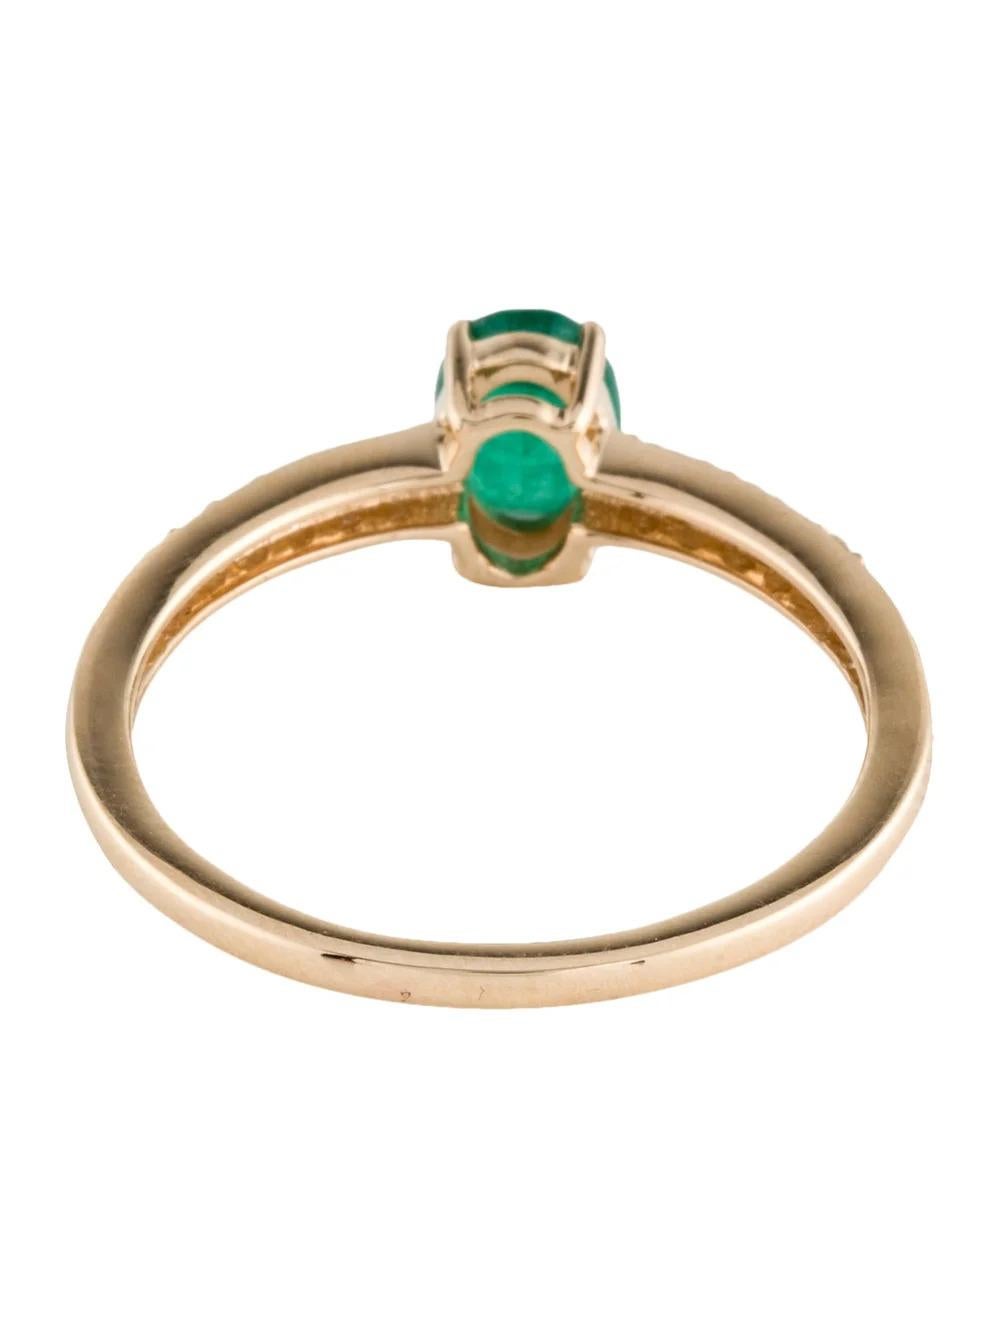 14K Emerald Diamond Cocktail Ring 8.75 Size - Elegant Fine Jewelry, Luxury In New Condition For Sale In Holtsville, NY